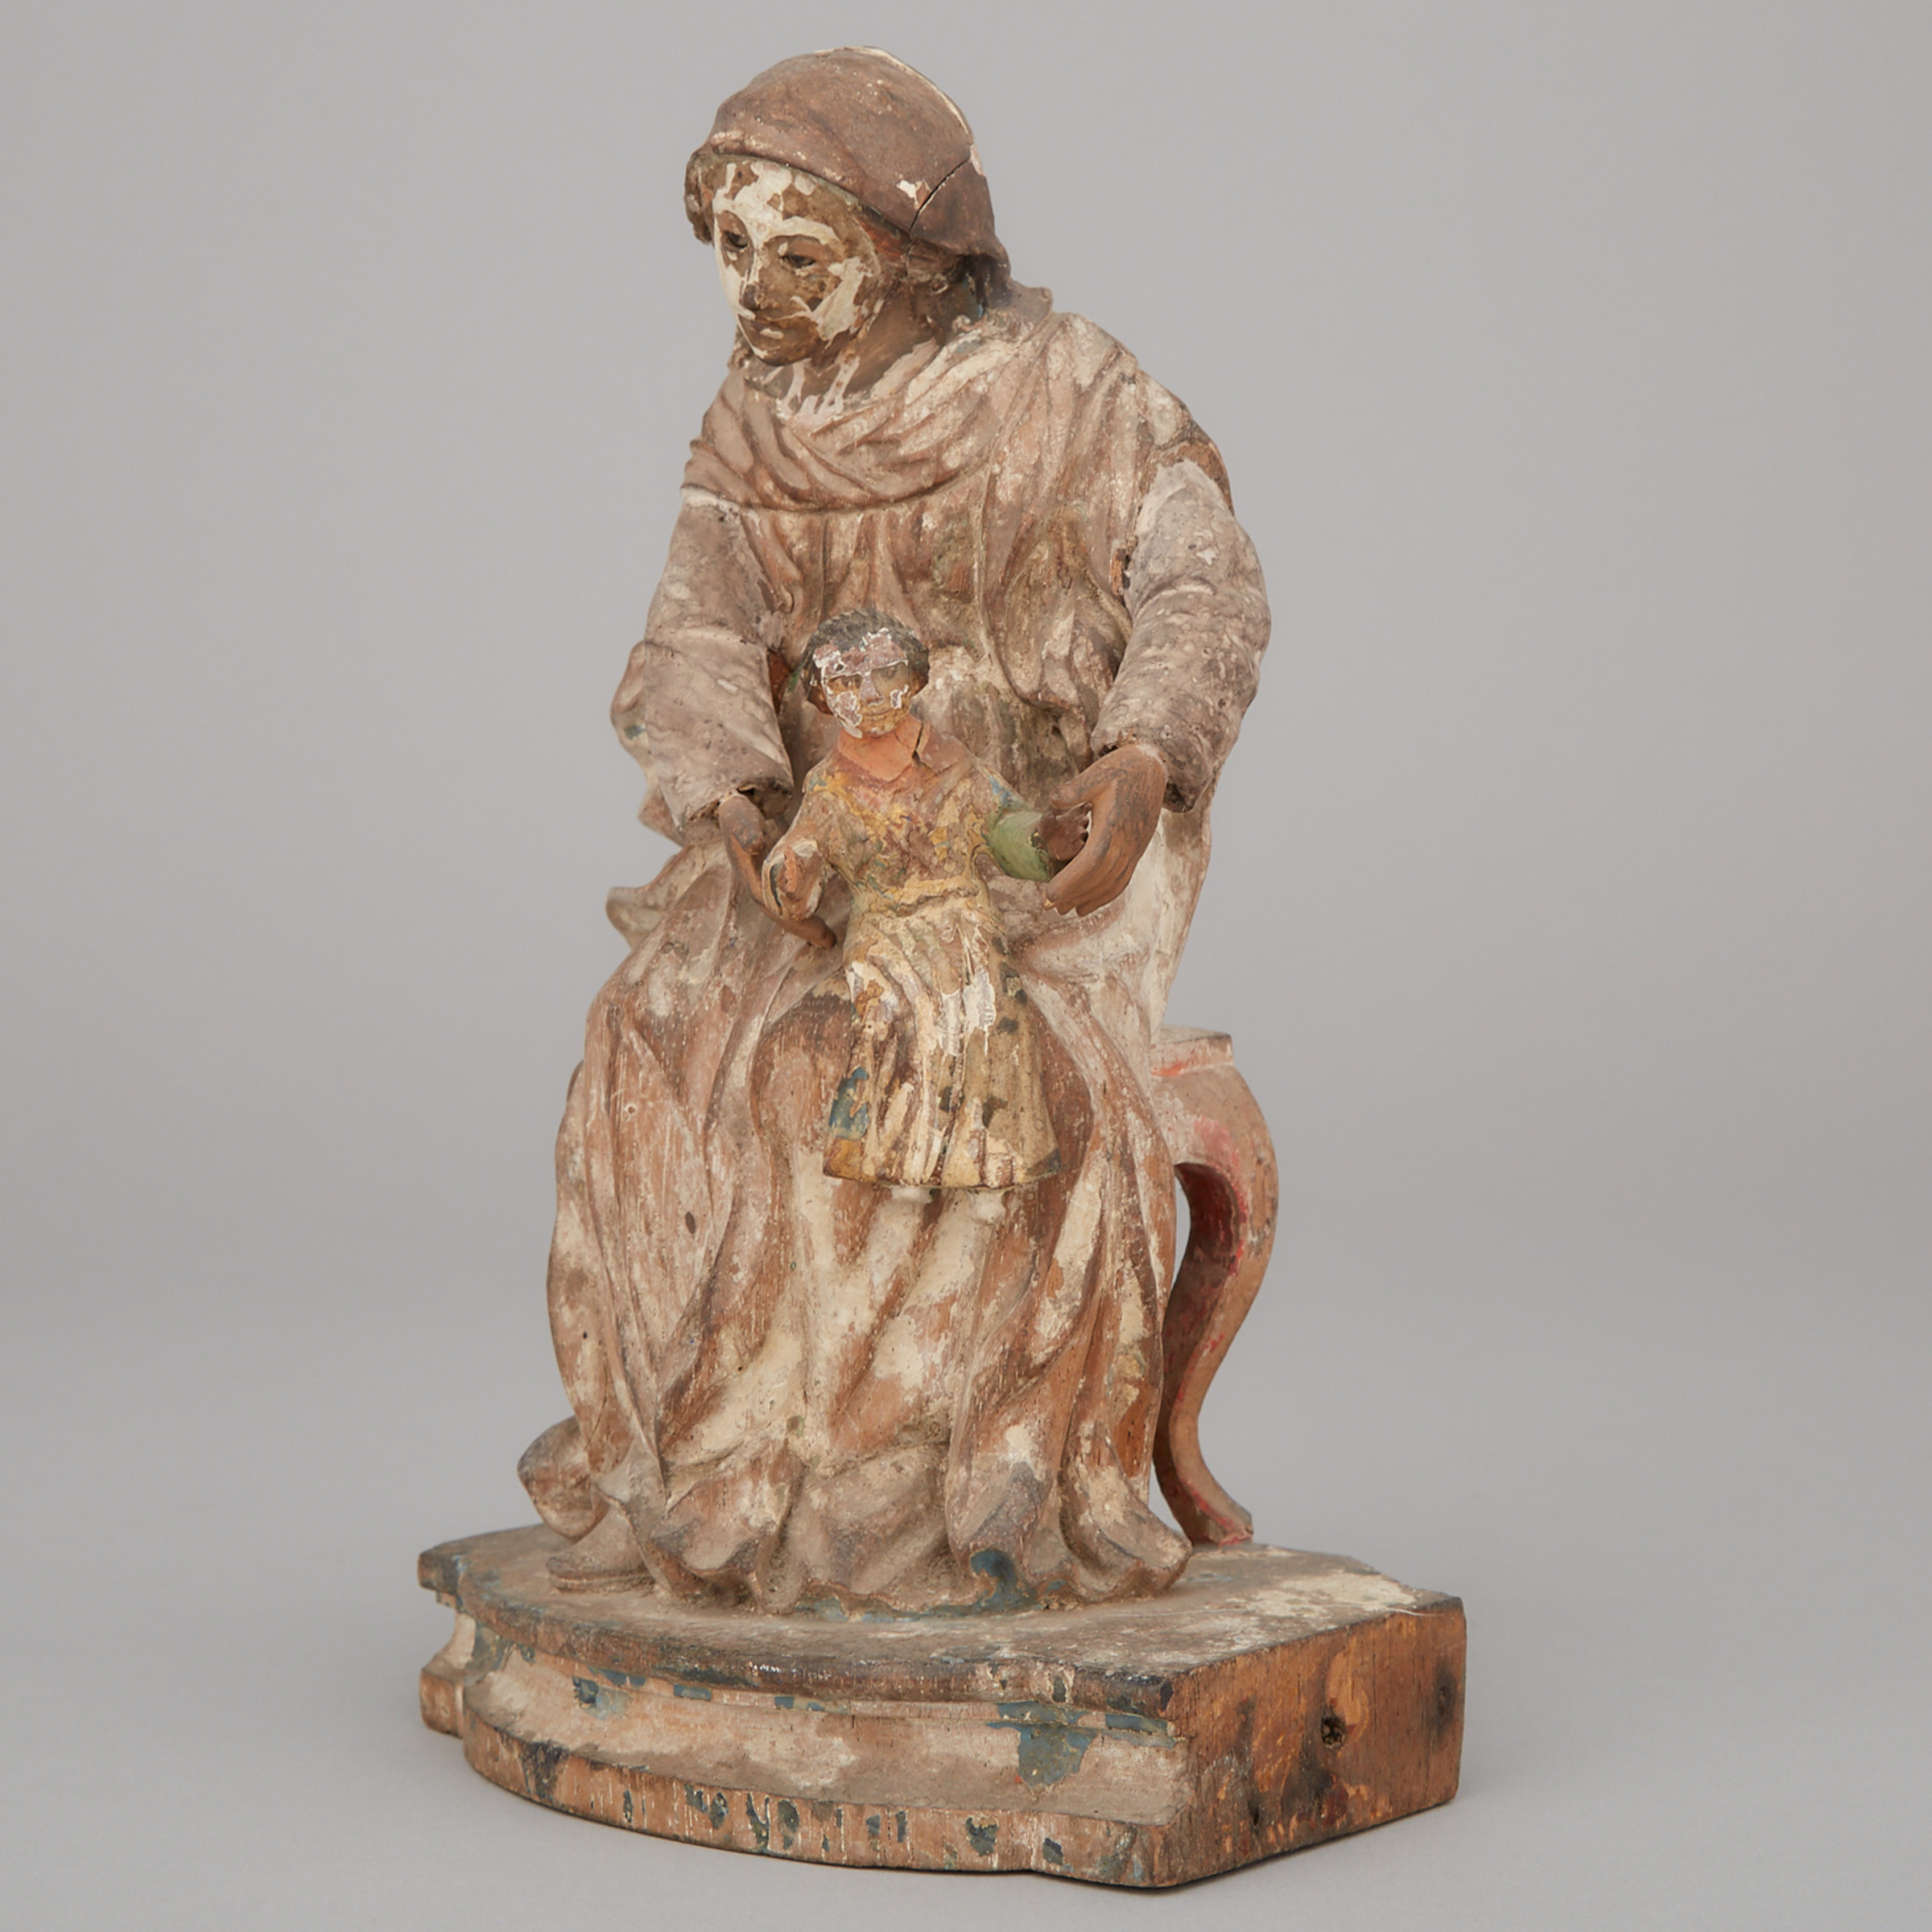 Spanish Colonial Santos Figure of the Sedes Sapientiae Madonna and Child, 18th/19th century